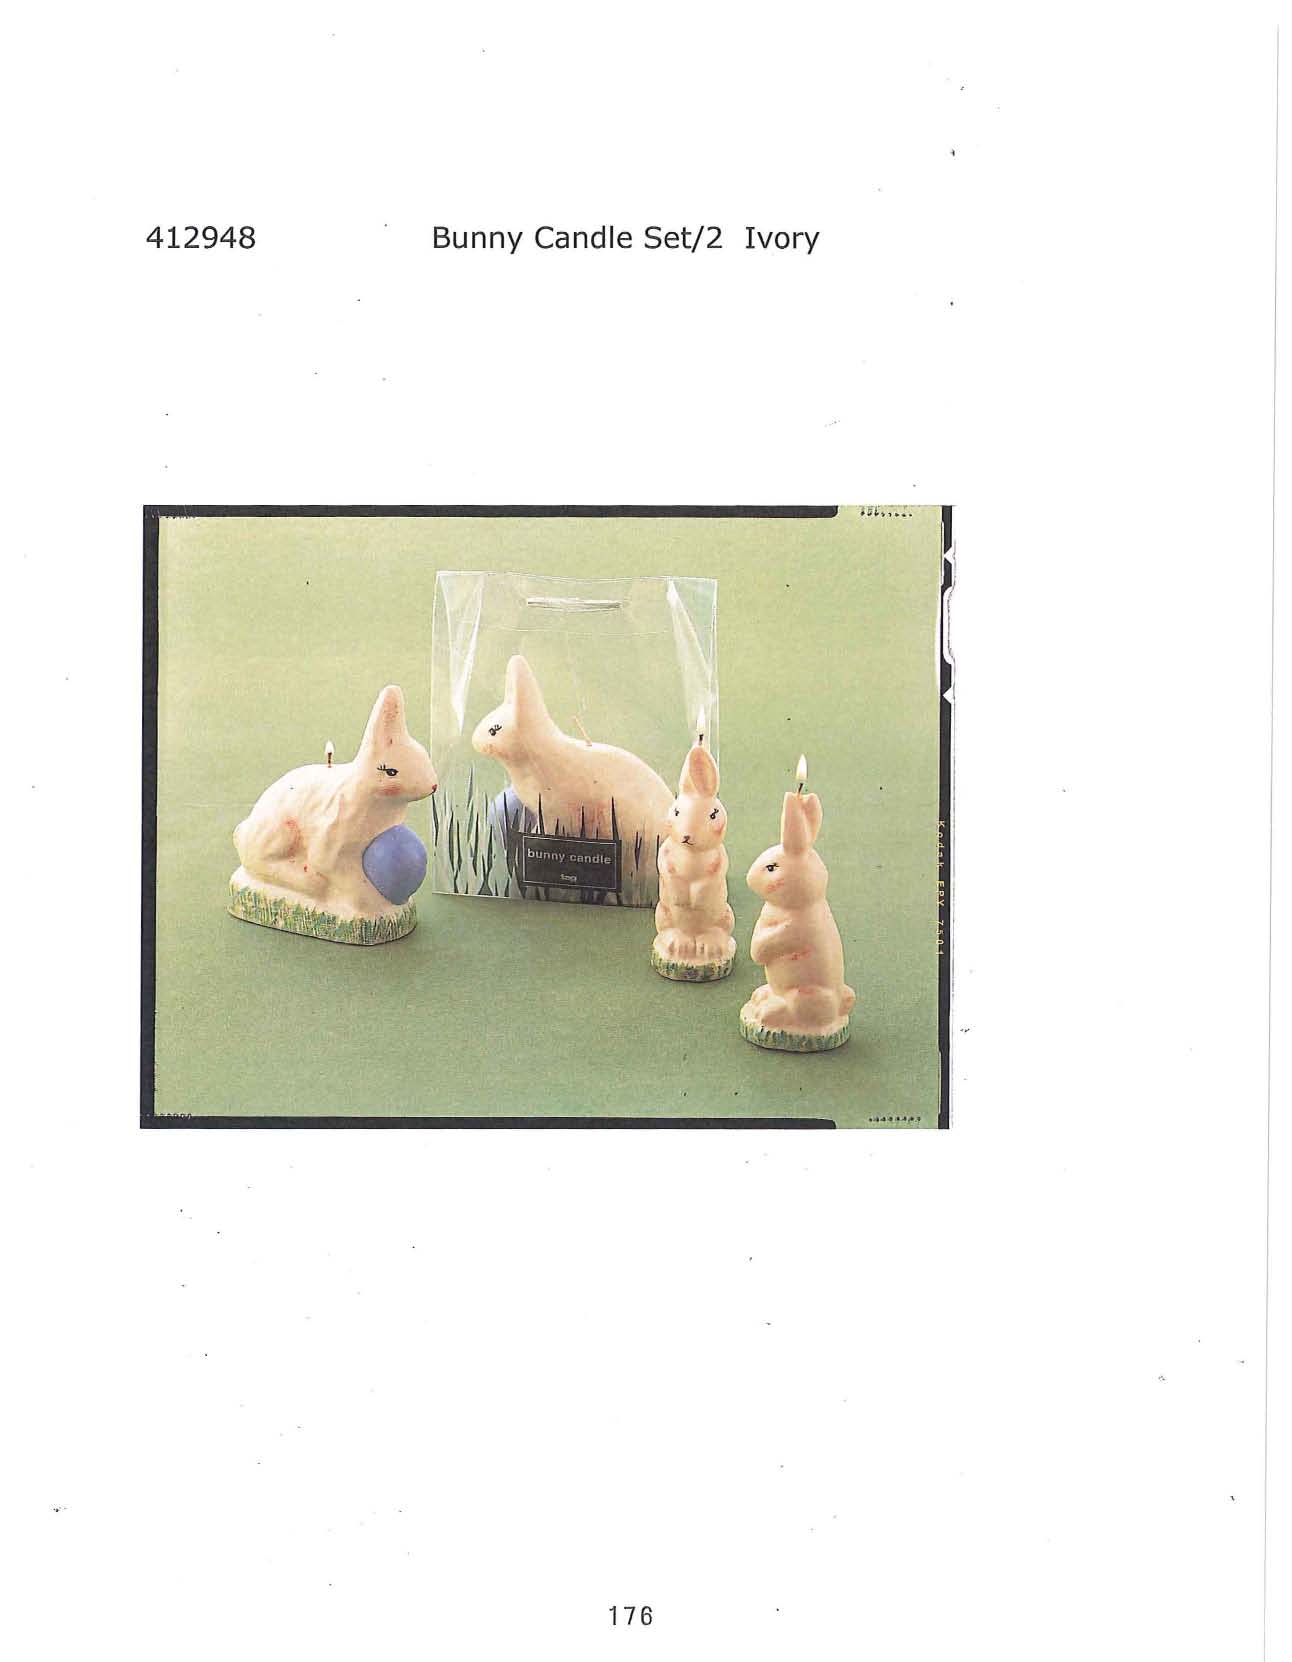 Bunny Candle s/2 - Ivory